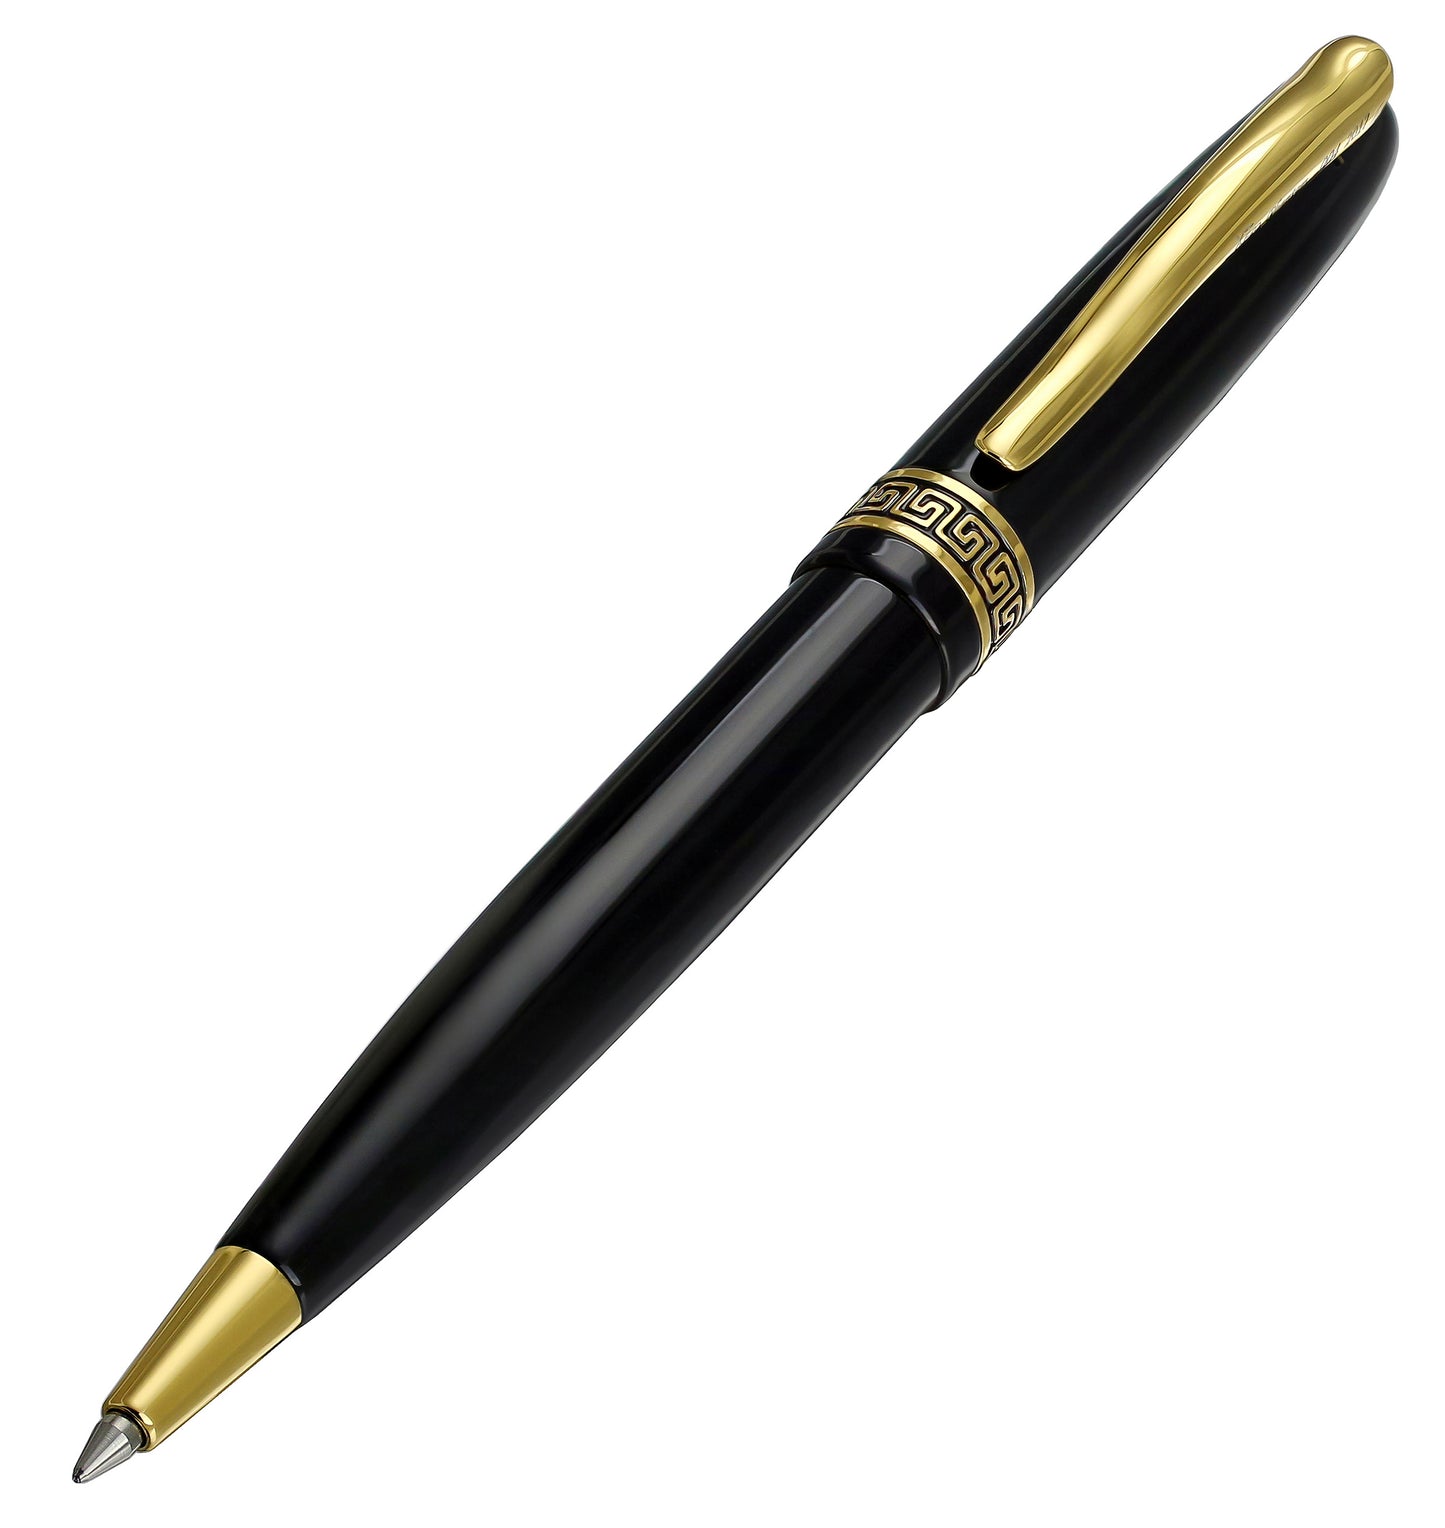 Xezo - Angled 3D view of the front of the Phantom Classic Black B ballpoint pen